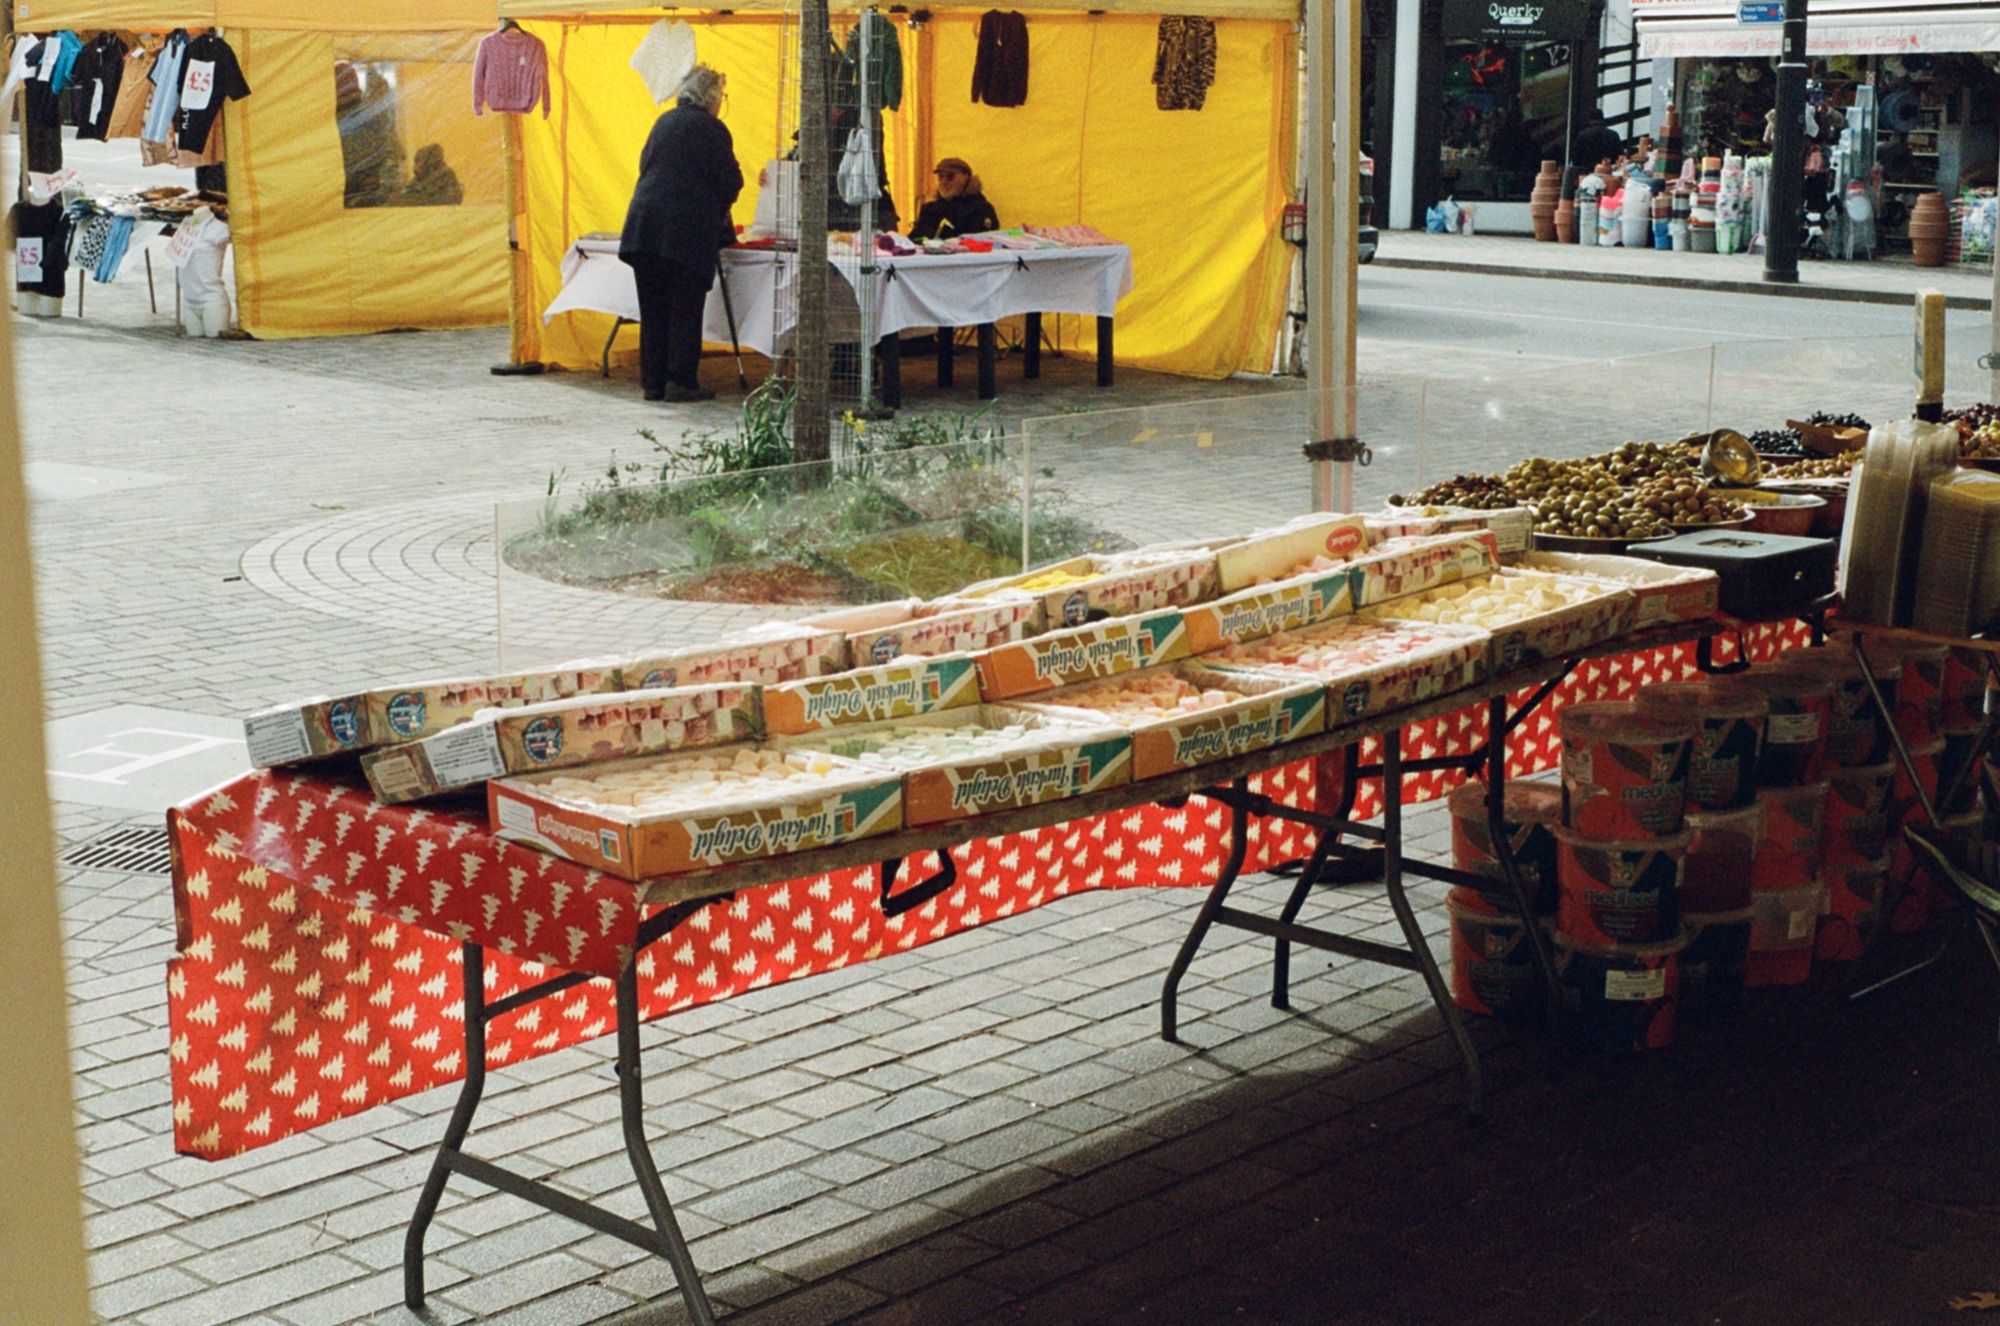 A market stall with a long table with red tablecloth, seen from behind. Lots of open boxes of Turkish delight/lokum in various colours line the table, along with olives and various other produce.